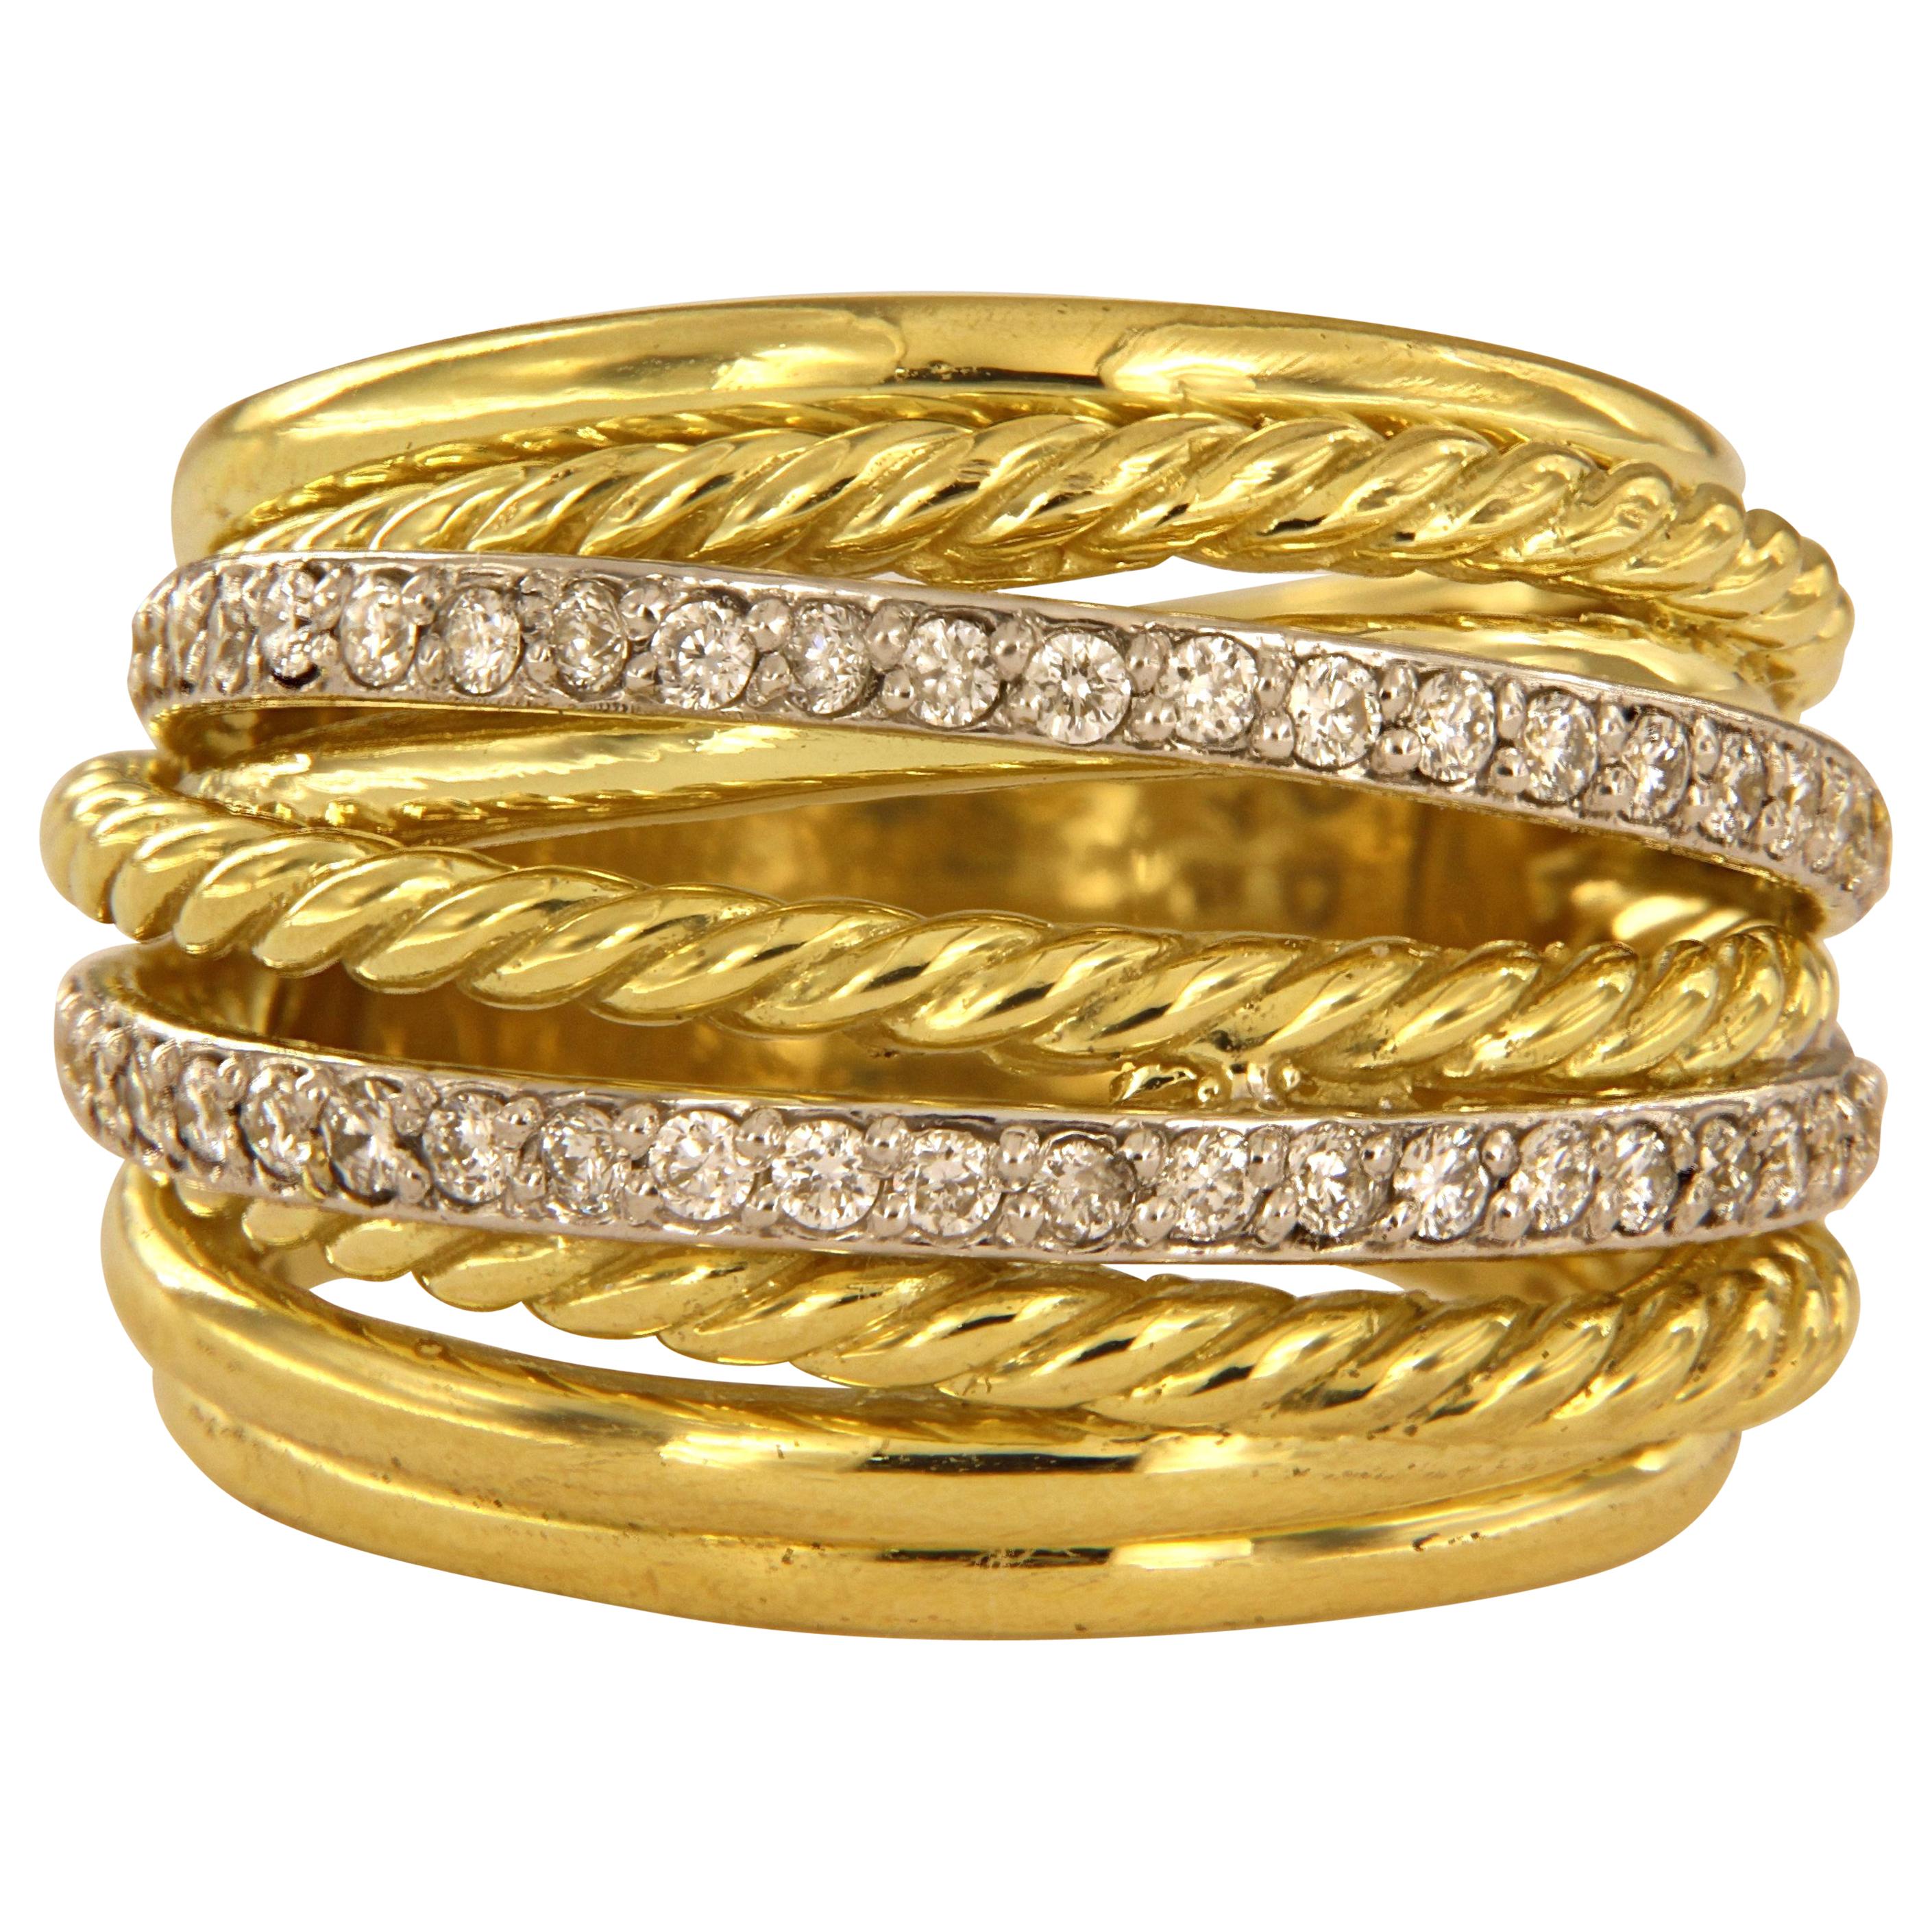 David Yurman Crossover Wide Ring in 18 Karat Yellow Gold with 